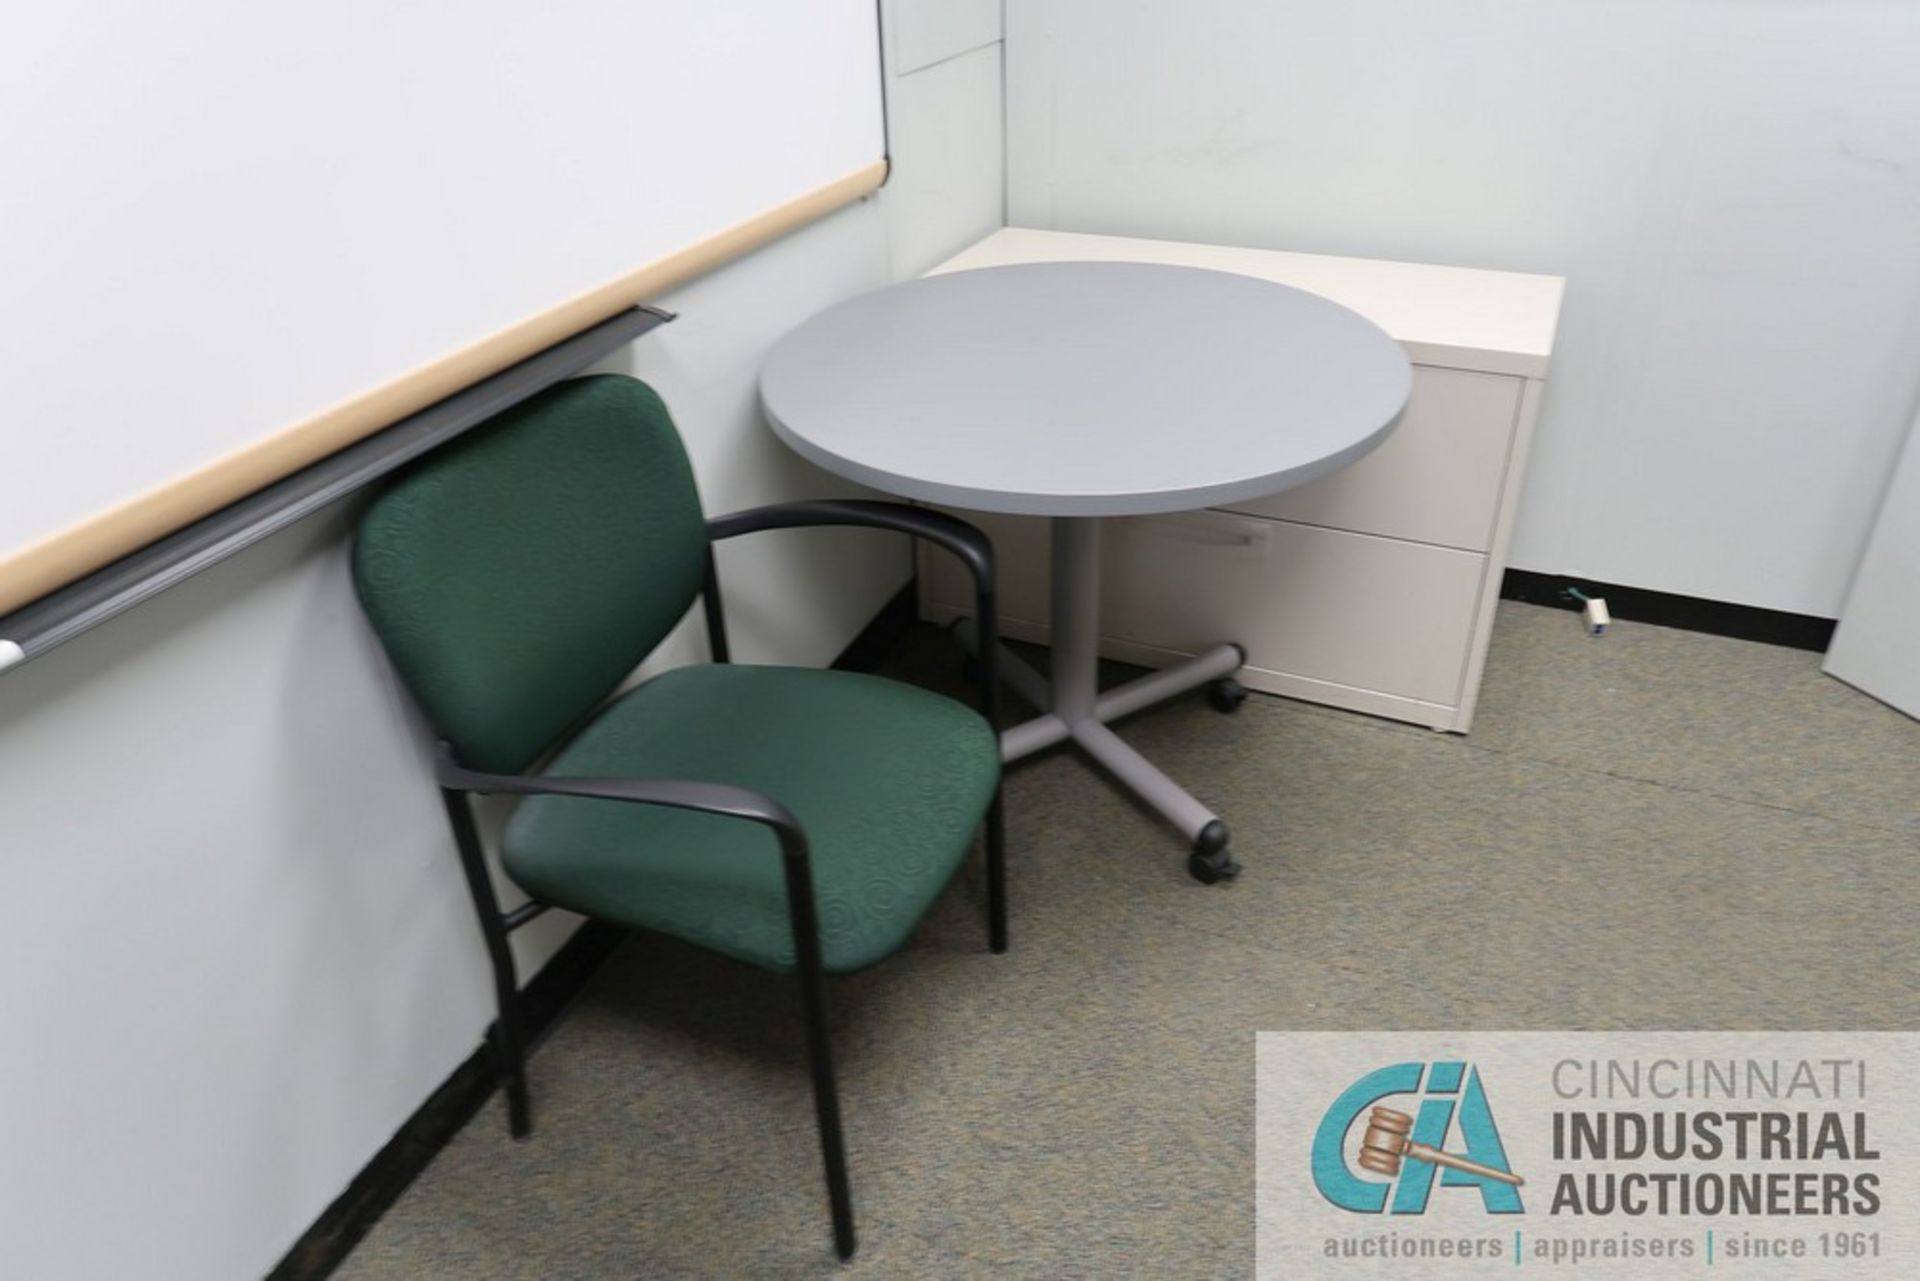 (LOT) CONTENTS OF OFFICE L-SHAPED DESK, 3' DIAMETER TABLE, 2-DRAWER CABINET - Image 3 of 3